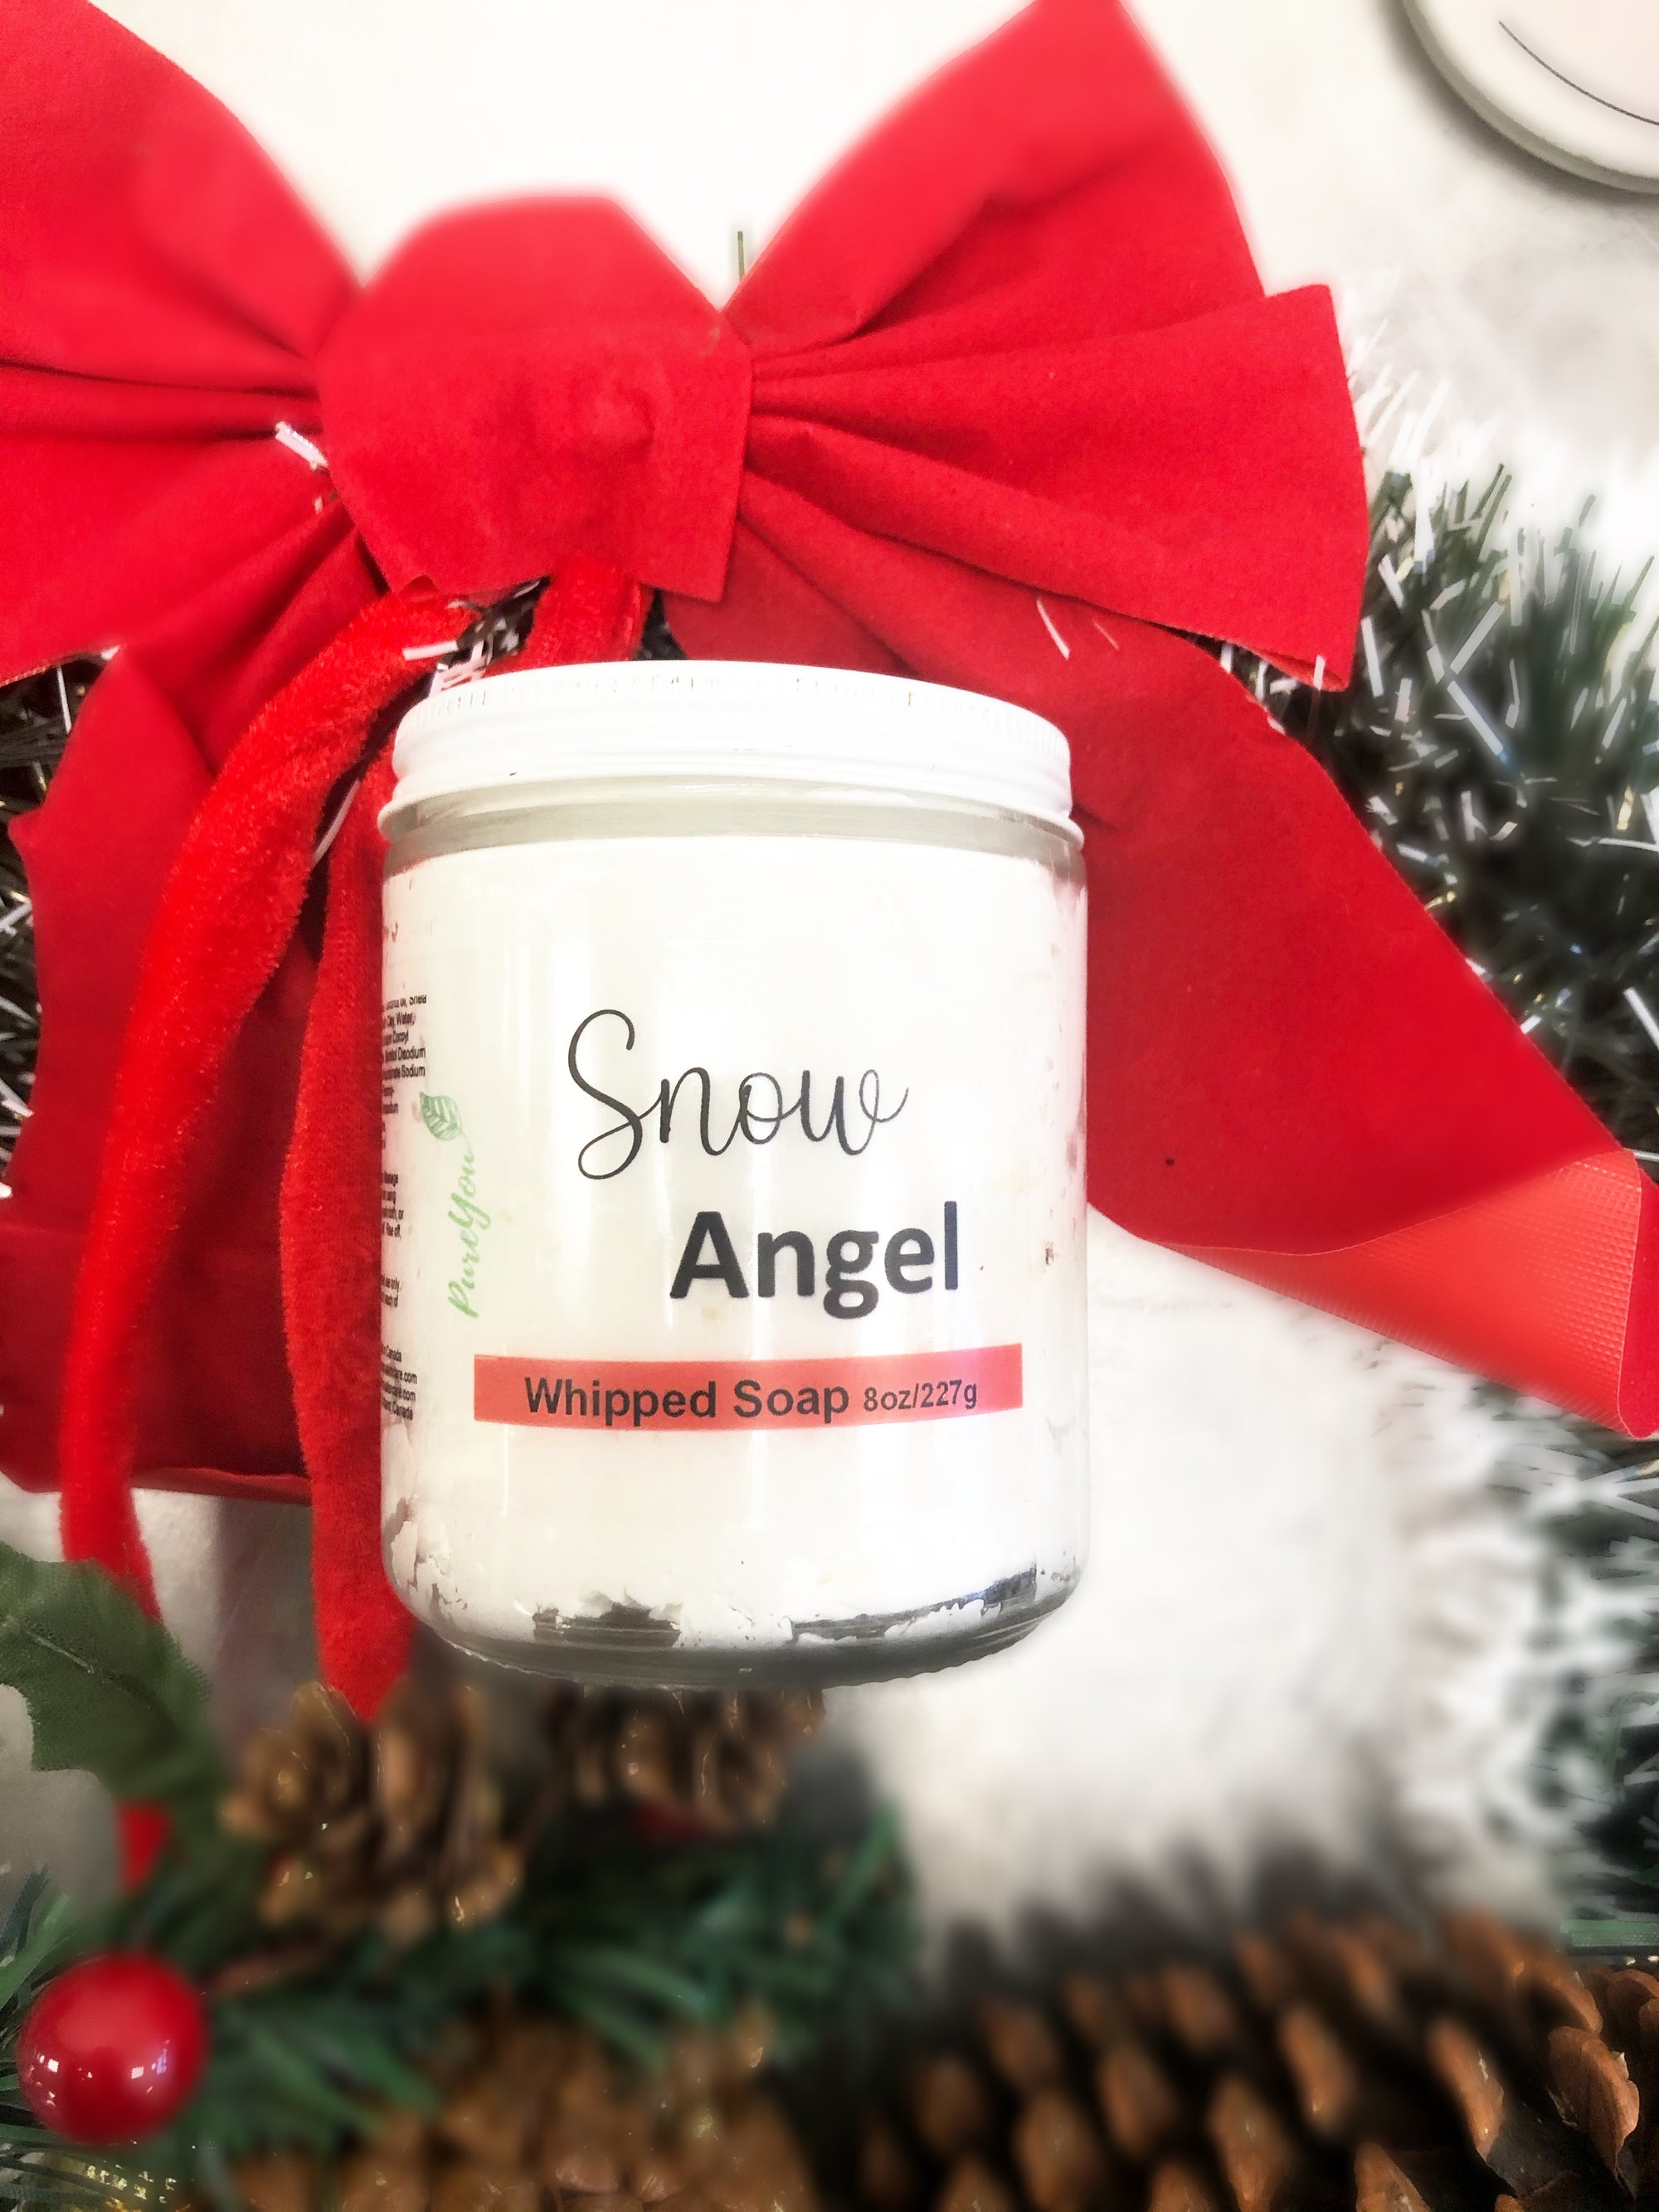 Snow Angel Whipped Soap